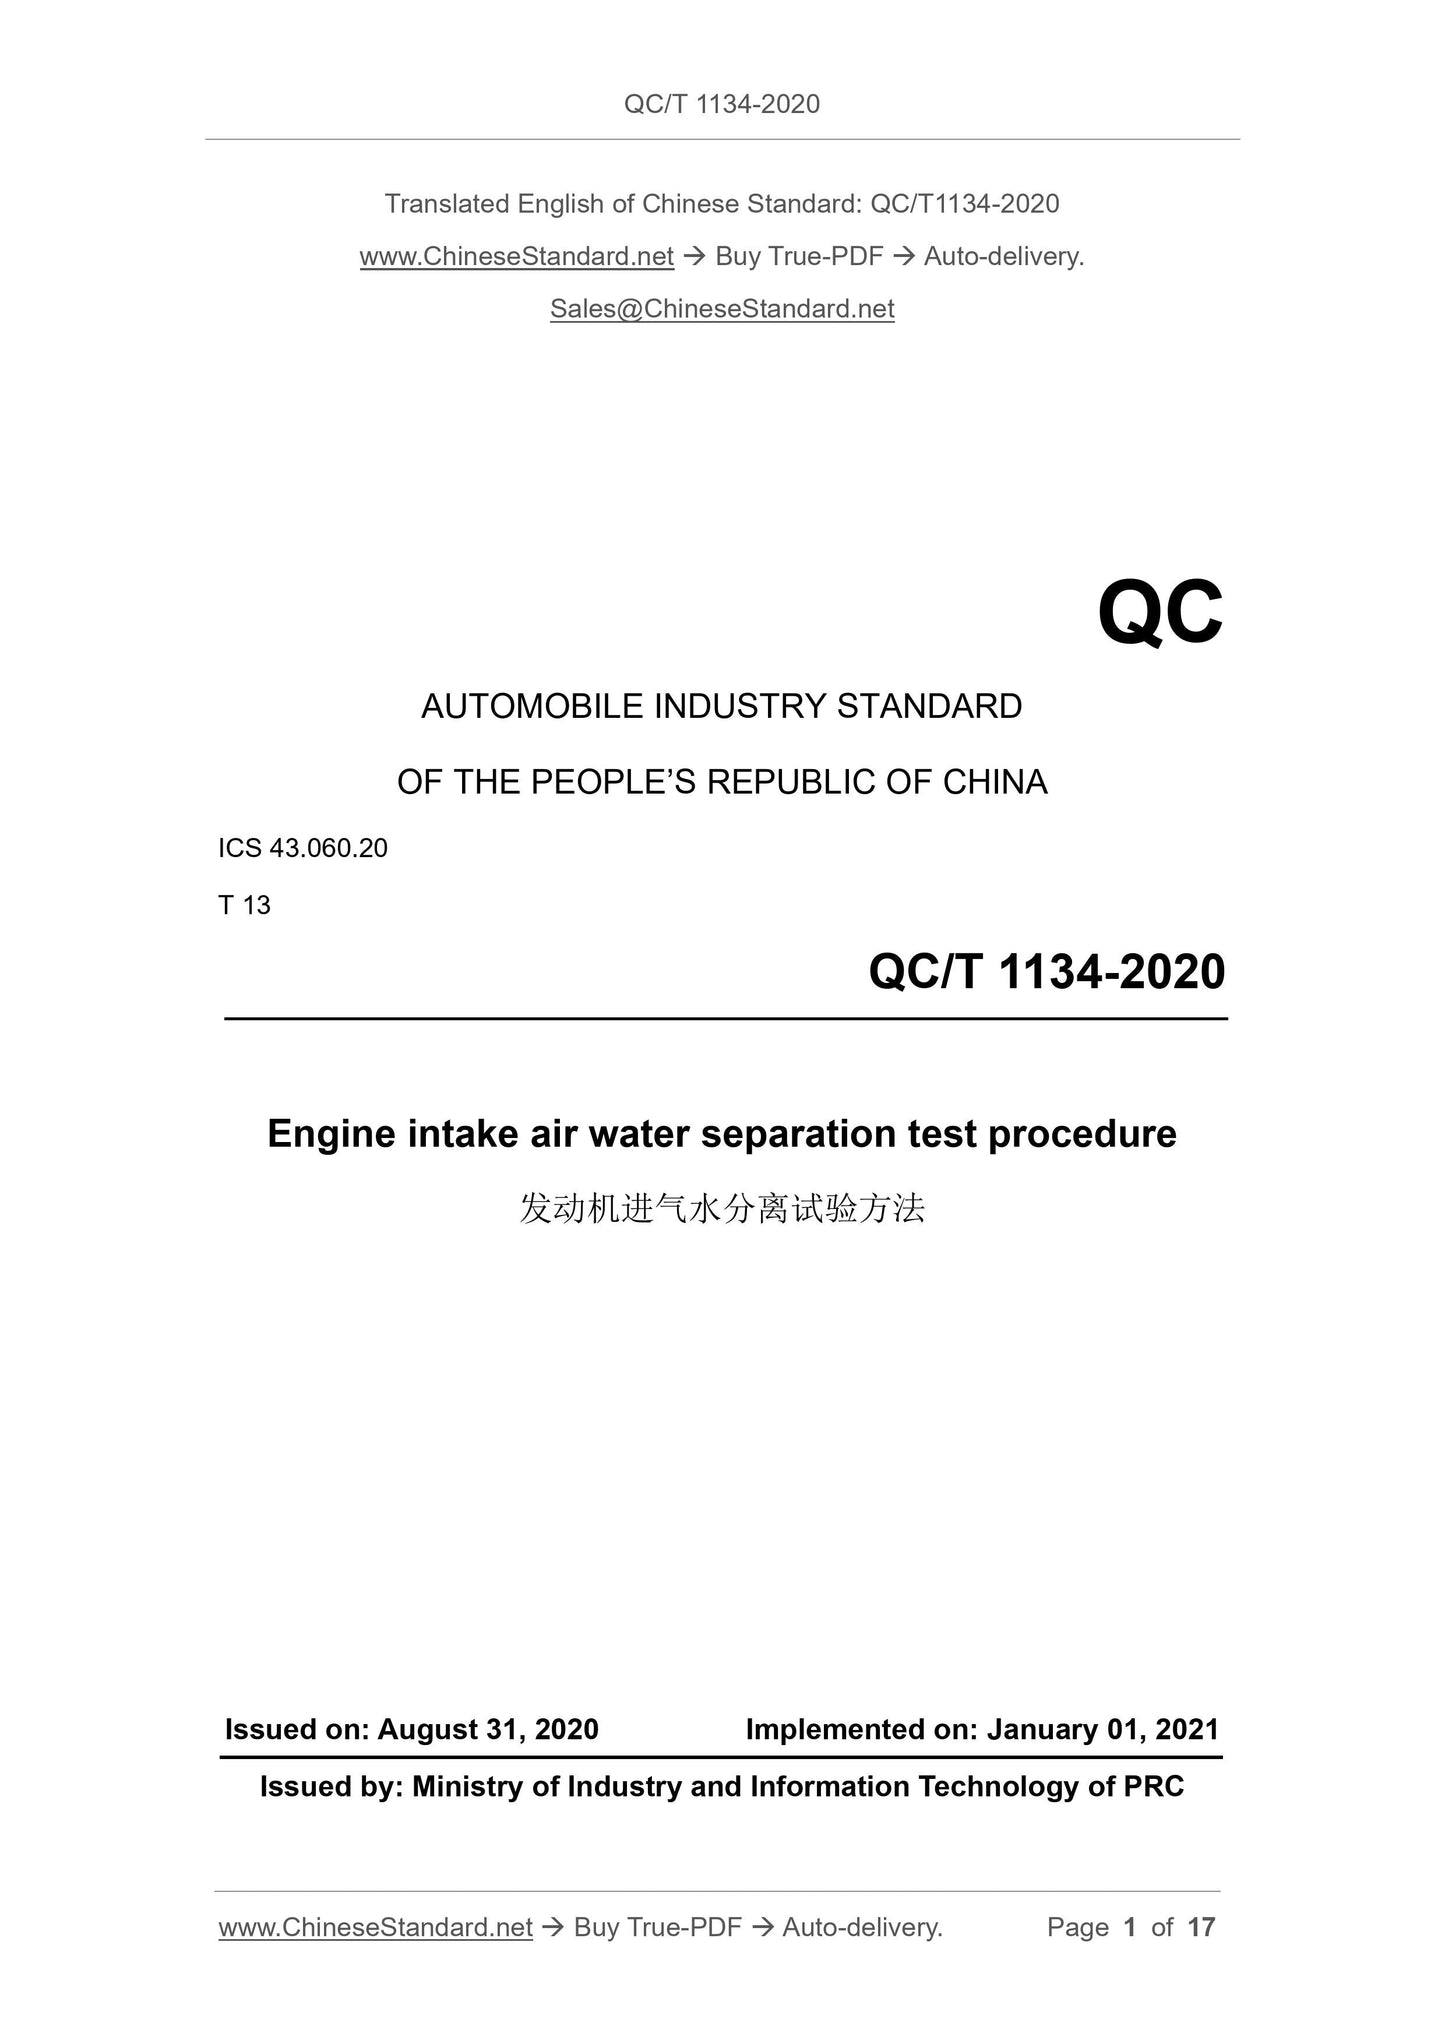 QC/T 1134-2020 Page 1